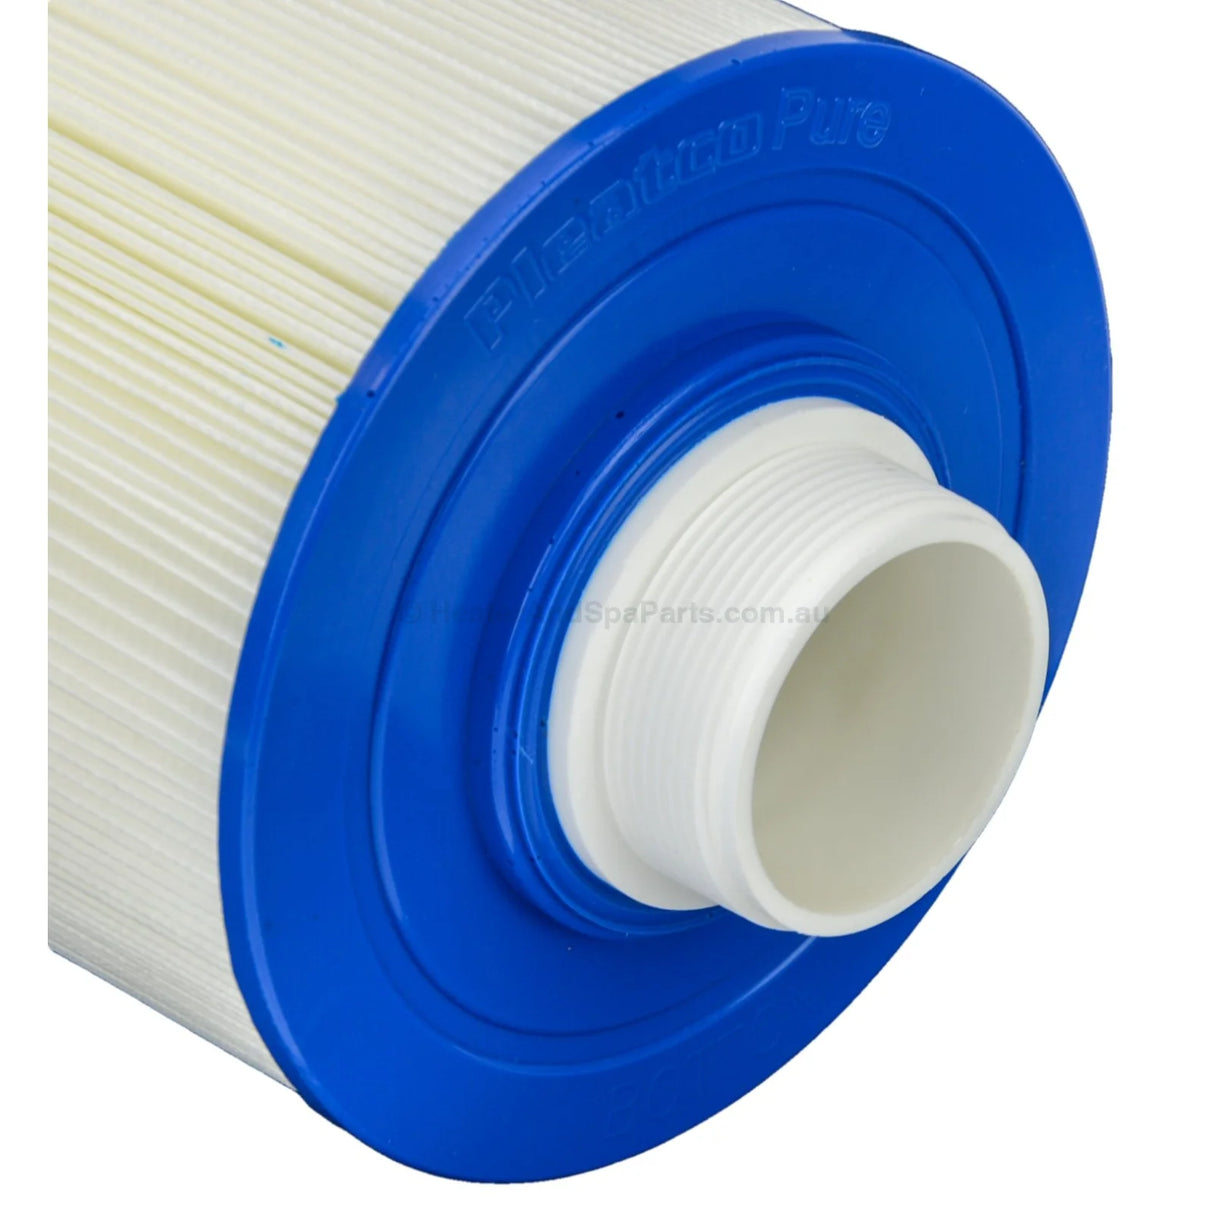 180mm x 150mm Artesian Spas Quali-flo disposable filter cartridge - Heater and Spa Parts